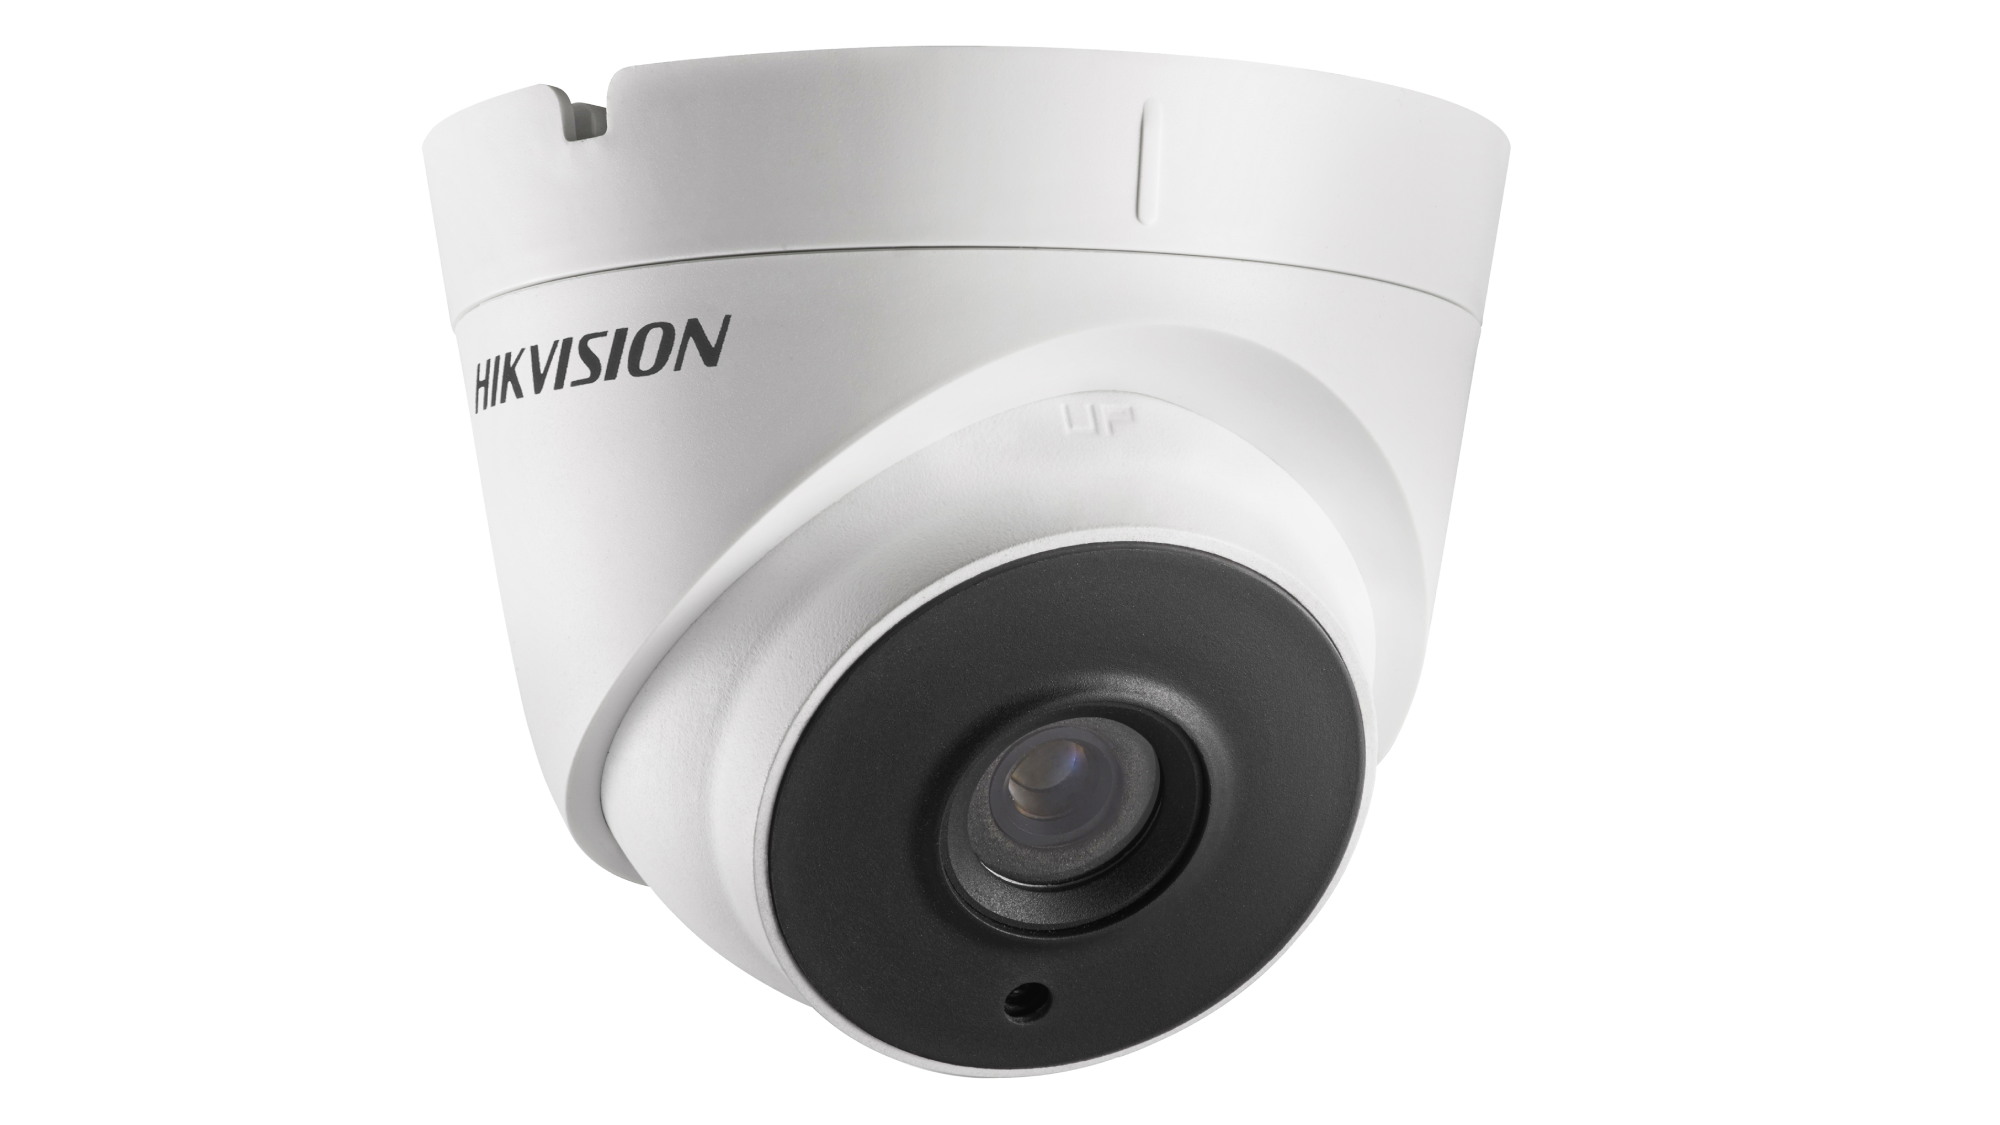 Hikvision (DS-2CE56D0T-IT3) Full HD 1080p 2 MP Fixed Turret Camera